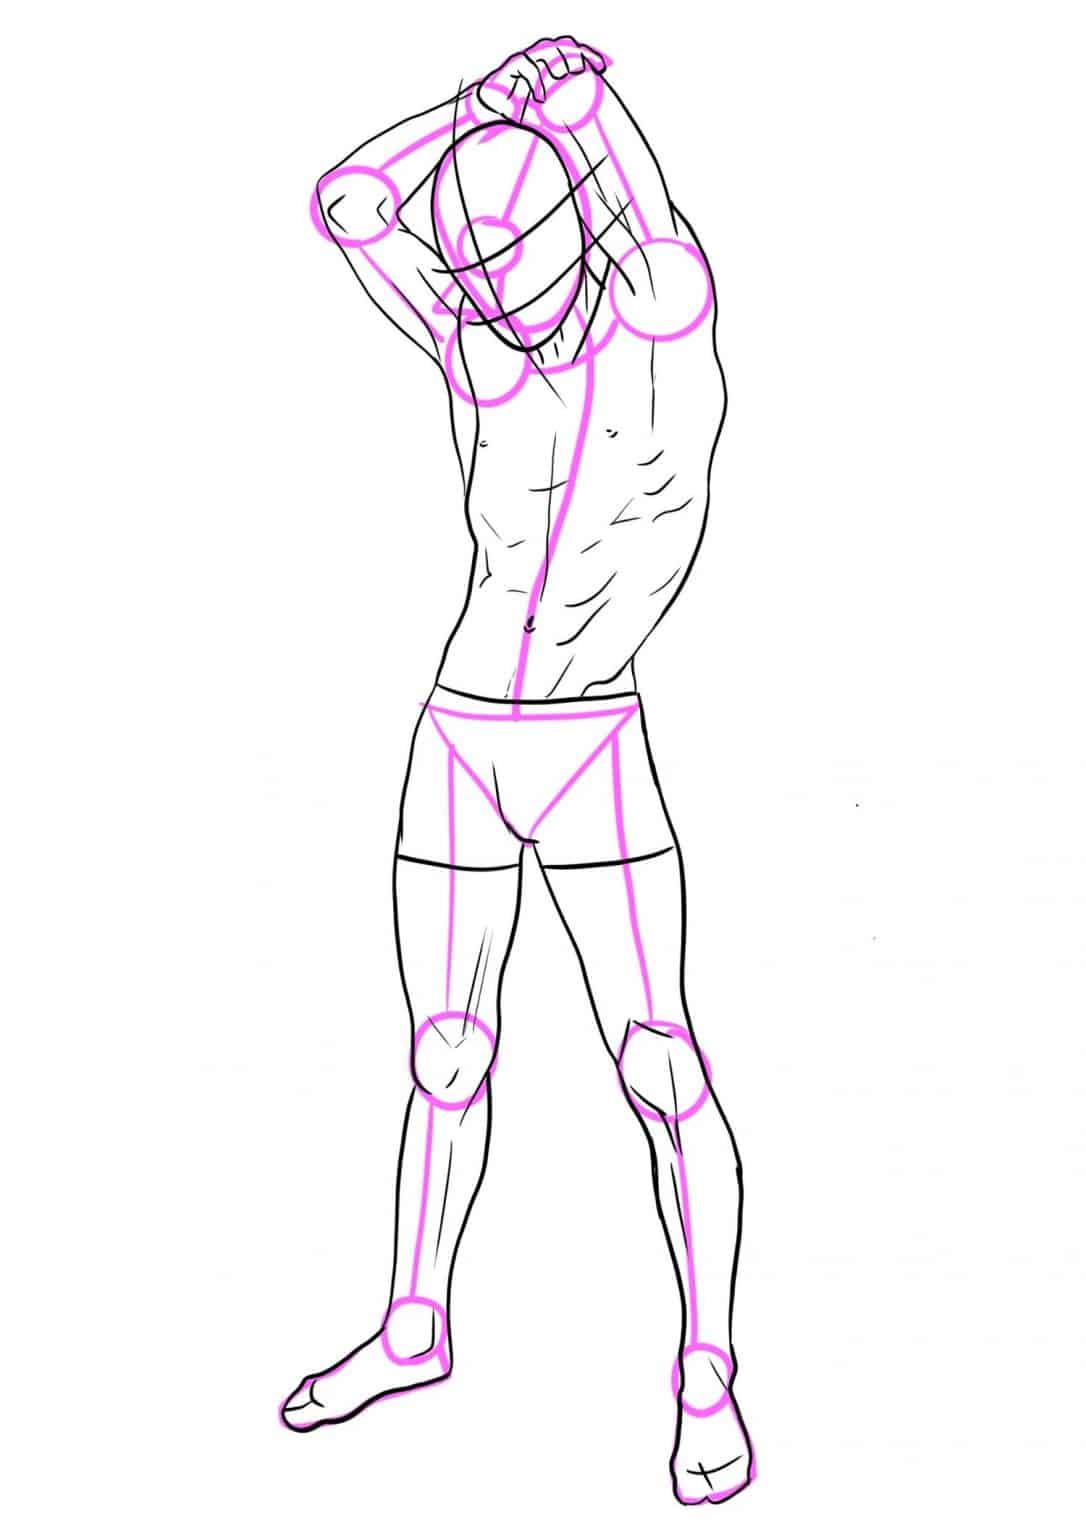 18 Standing Poses Reference How to Draw the Human Figure in a Standing